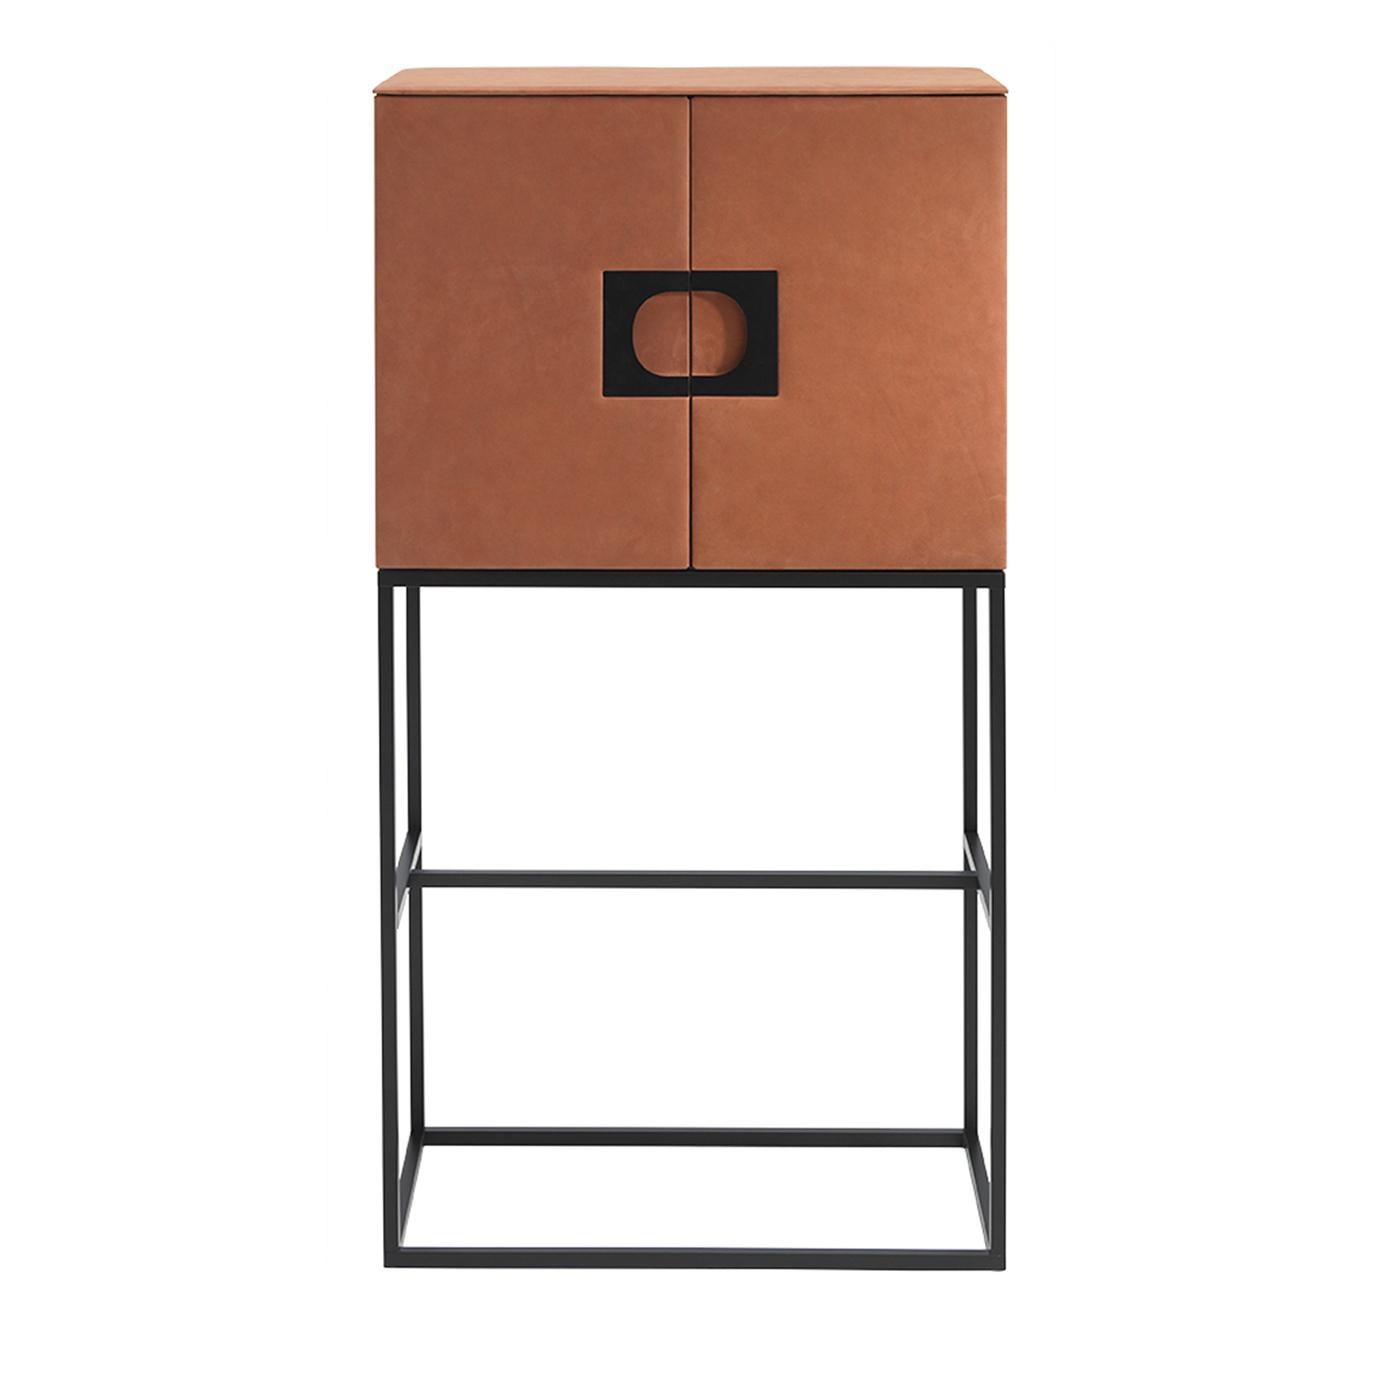 Moustique bar cabinet by Daytona, a valuable and luxury piece, with matte black finish steel base, plywood frame and doors covered in leather. The interior is lacquered opaque smoke with wooden and led shelves. Steel logo handle. Structure and doors